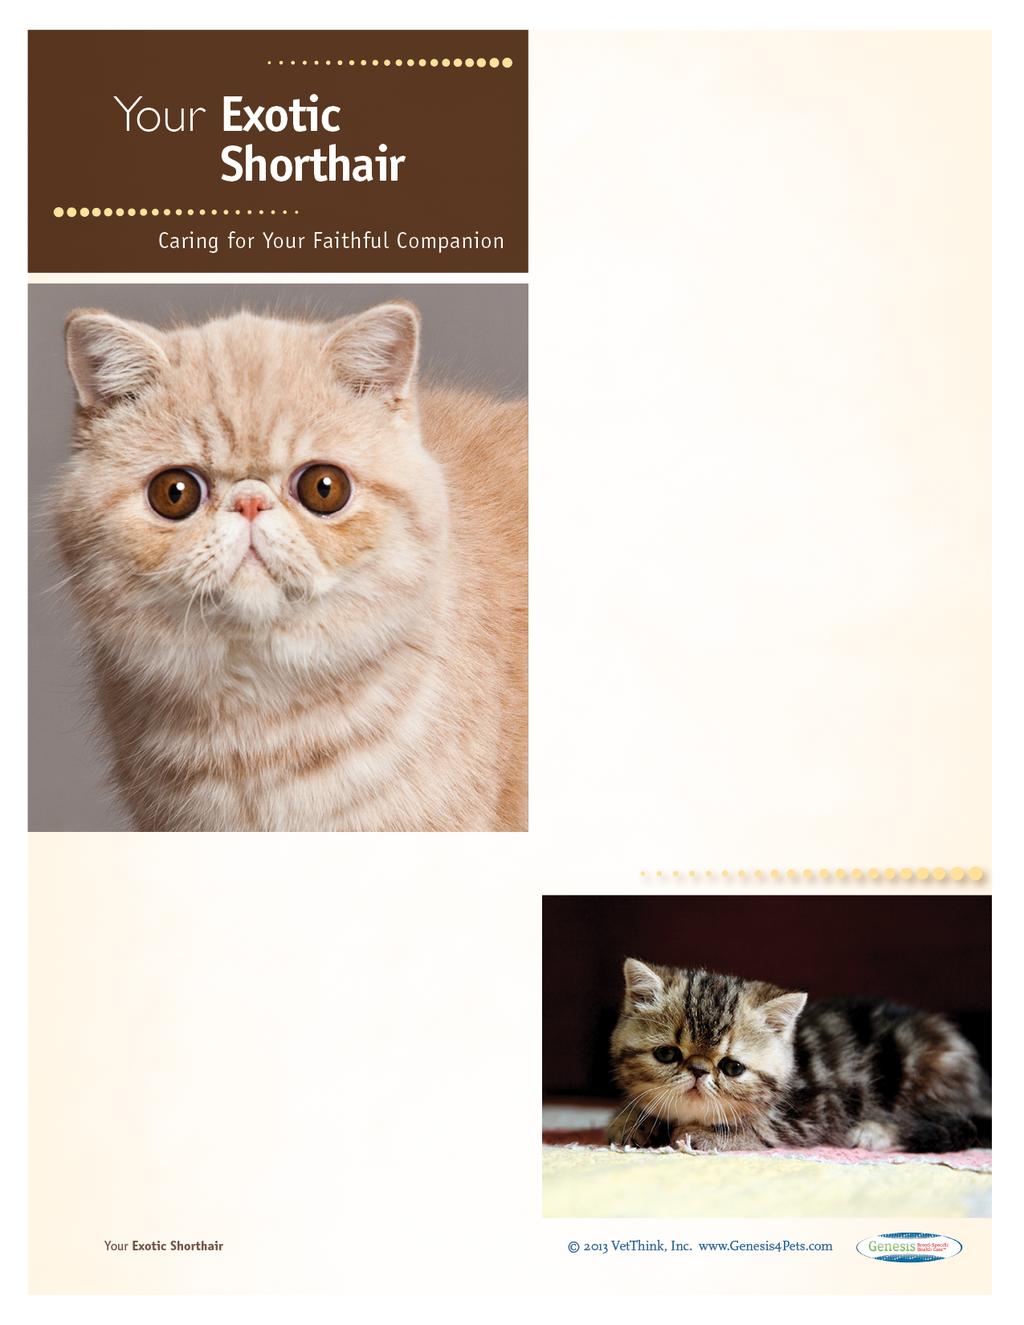 Exotic Shorthairs: What a Unique Breed! Your cat is special! She senses your moods, is curious about your day, and has purred her way into your heart.